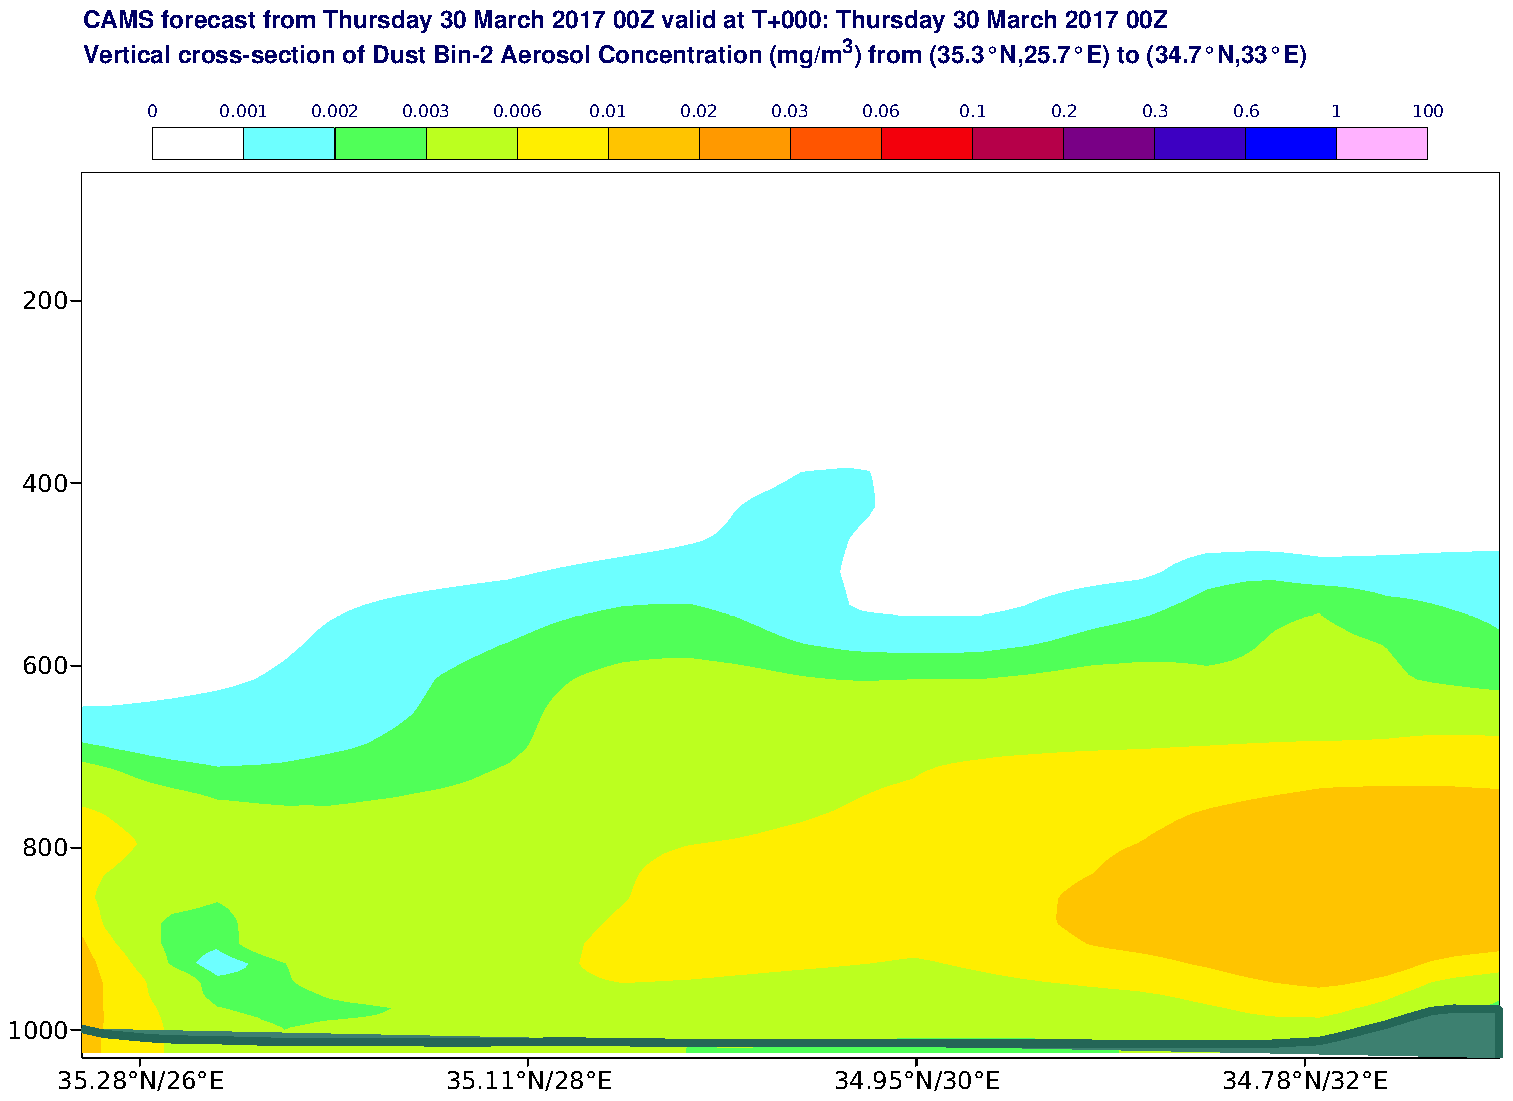 Vertical cross-section of Dust Bin-2 Aerosol Concentration (mg/m3) valid at T0 - 2017-03-30 00:00